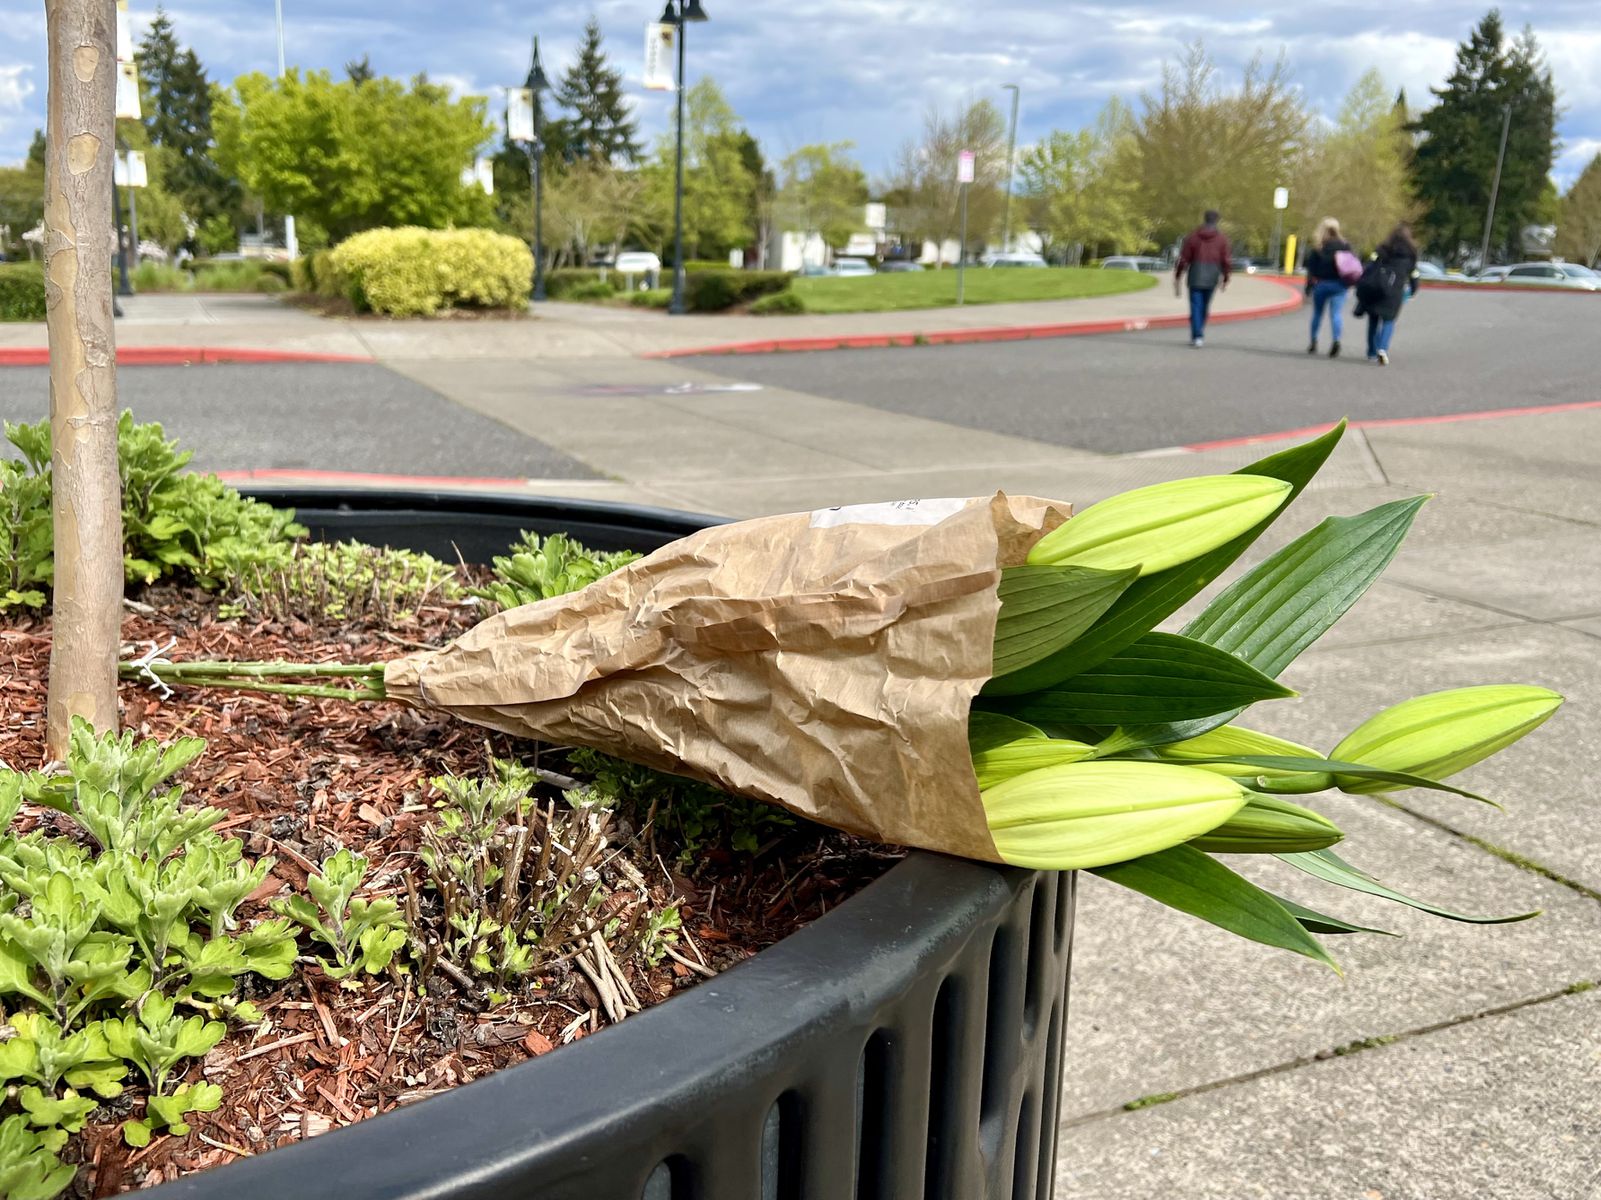 A bouquet of flowers rests near the entrance to Southridge High School in Beaverton on Wednesday, April 27, 2022.